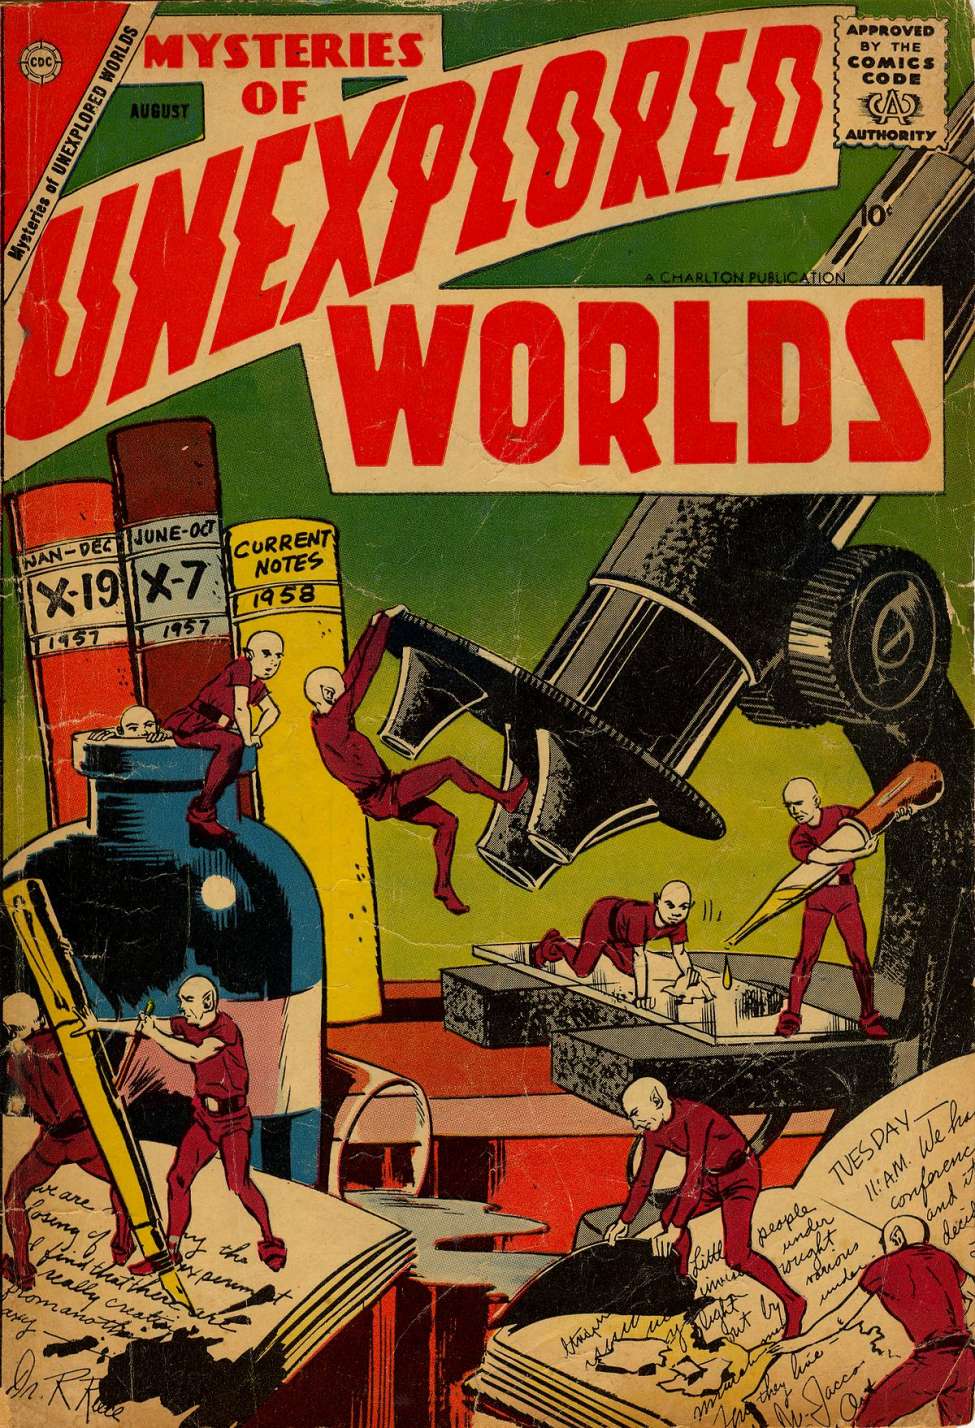 Comic Book Cover For Mysteries of Unexplored Worlds 9